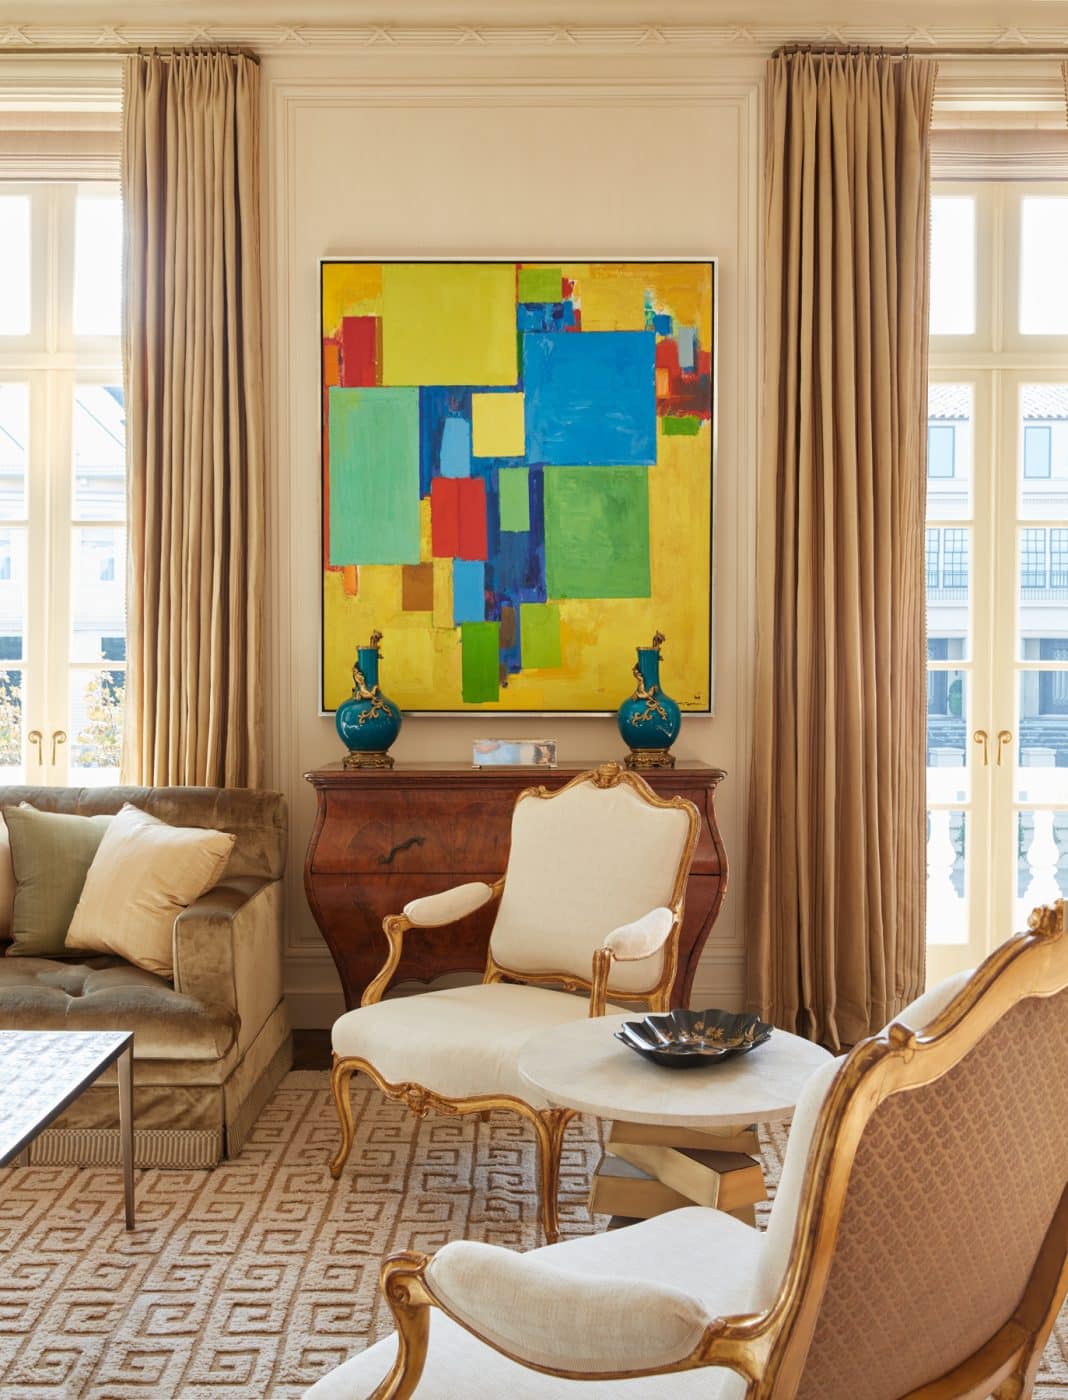 San Francisco neoclassical mansion living room by interior designer Suzanne Tucker with Hans Hofmann abstract painting